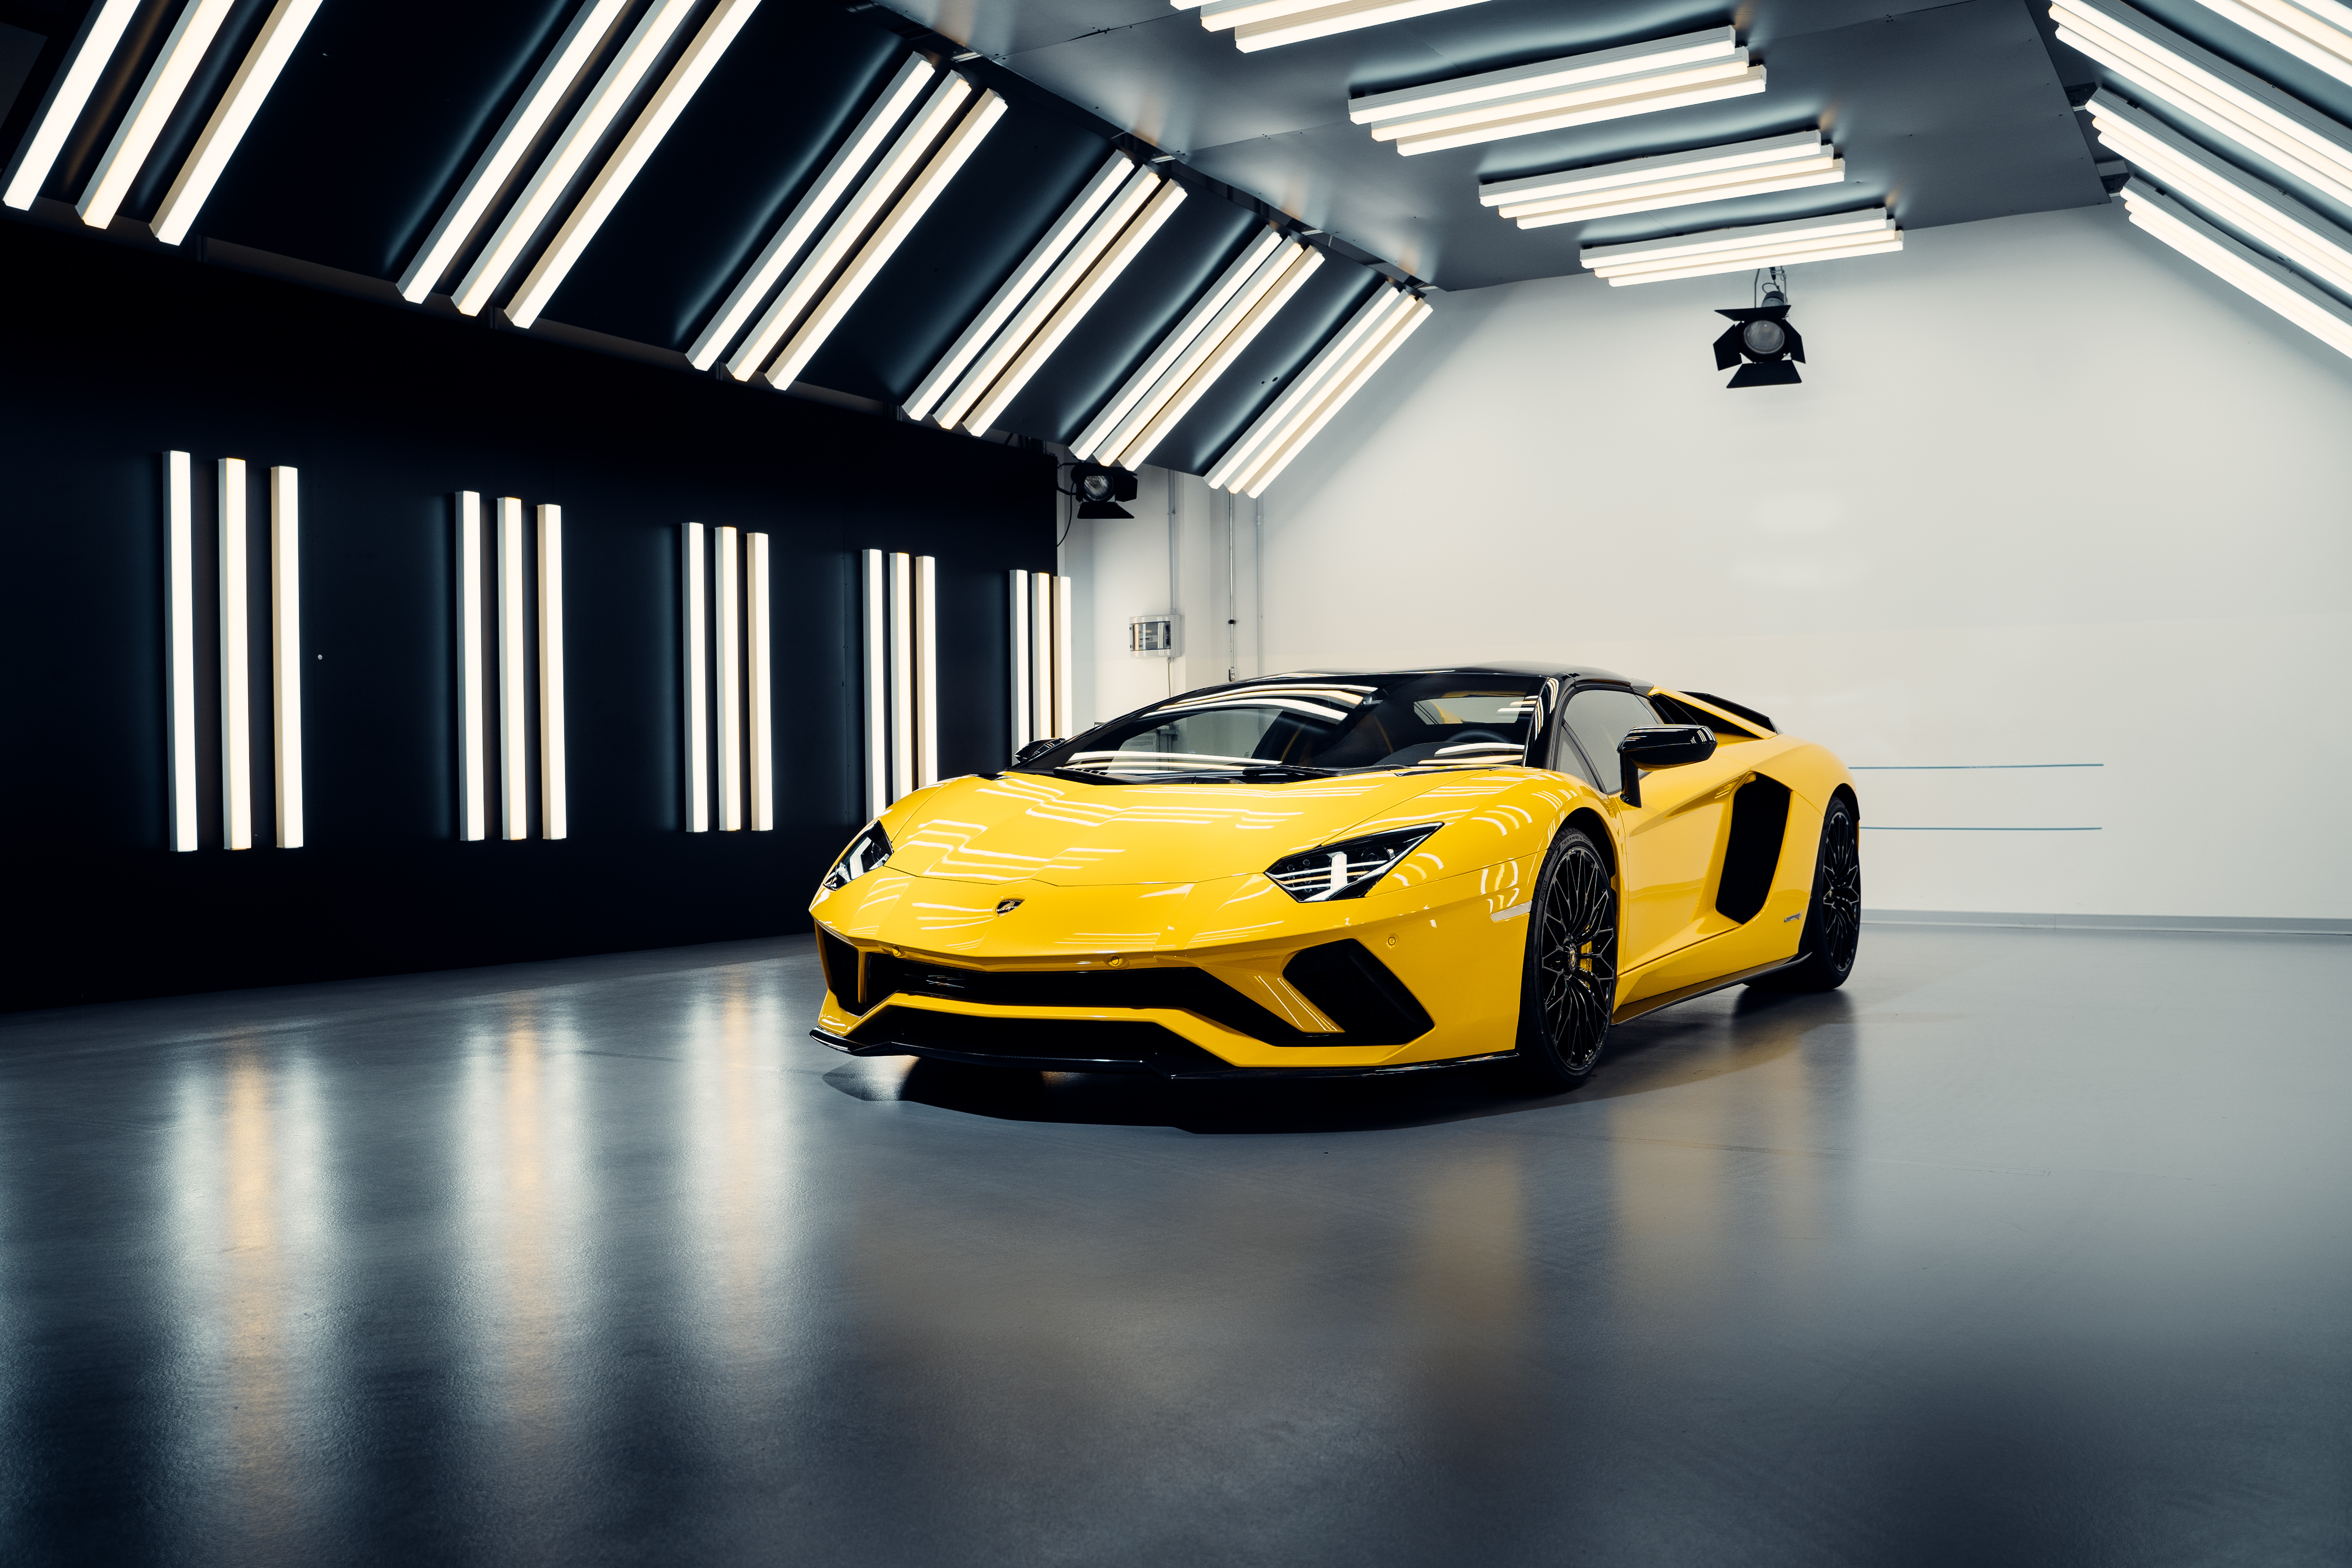 Wallpaper Yellow Lamborghini Aventador Parked Near Brown Wooden Building  During Daytime, Background - Download Free Image